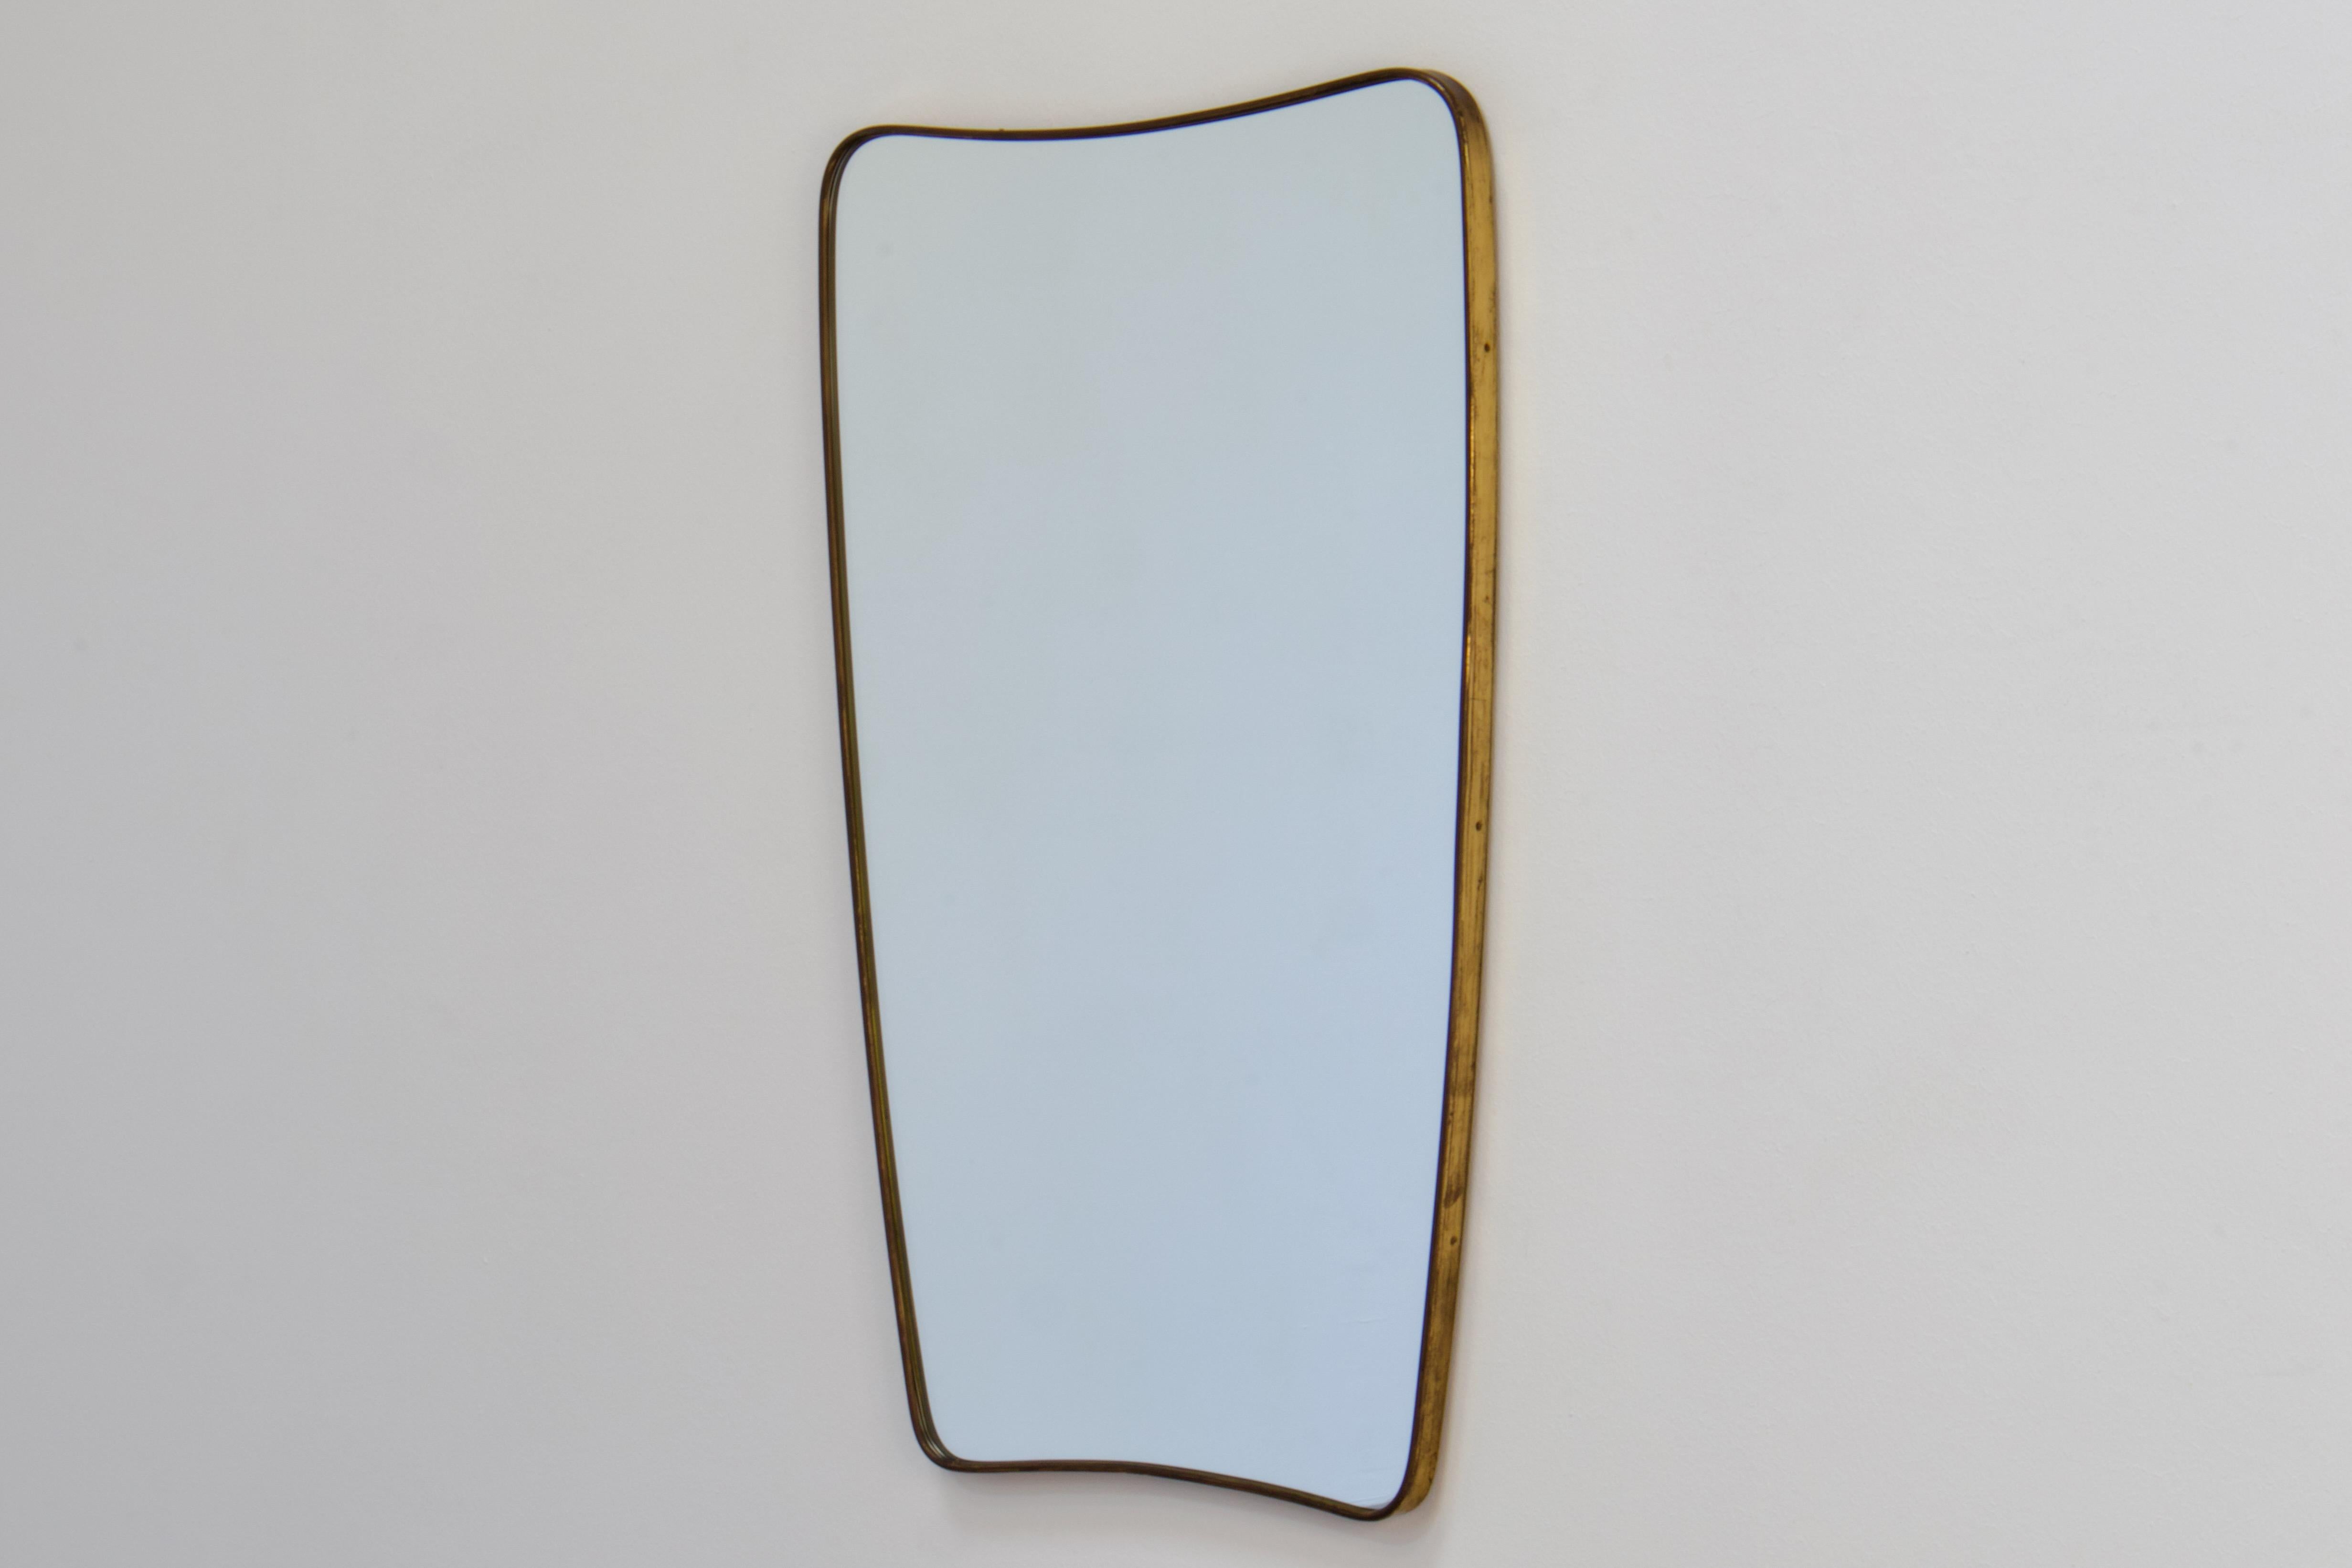 Gio Ponti era Mid-Century Modern wall mirror in patinated brass. Made in Italy in 1950s.

The shape of the mirror is a very elegant ovaloid with rounded corners and beautiful taper. The top is wider, and tapers down to the bottom.

This mirror is